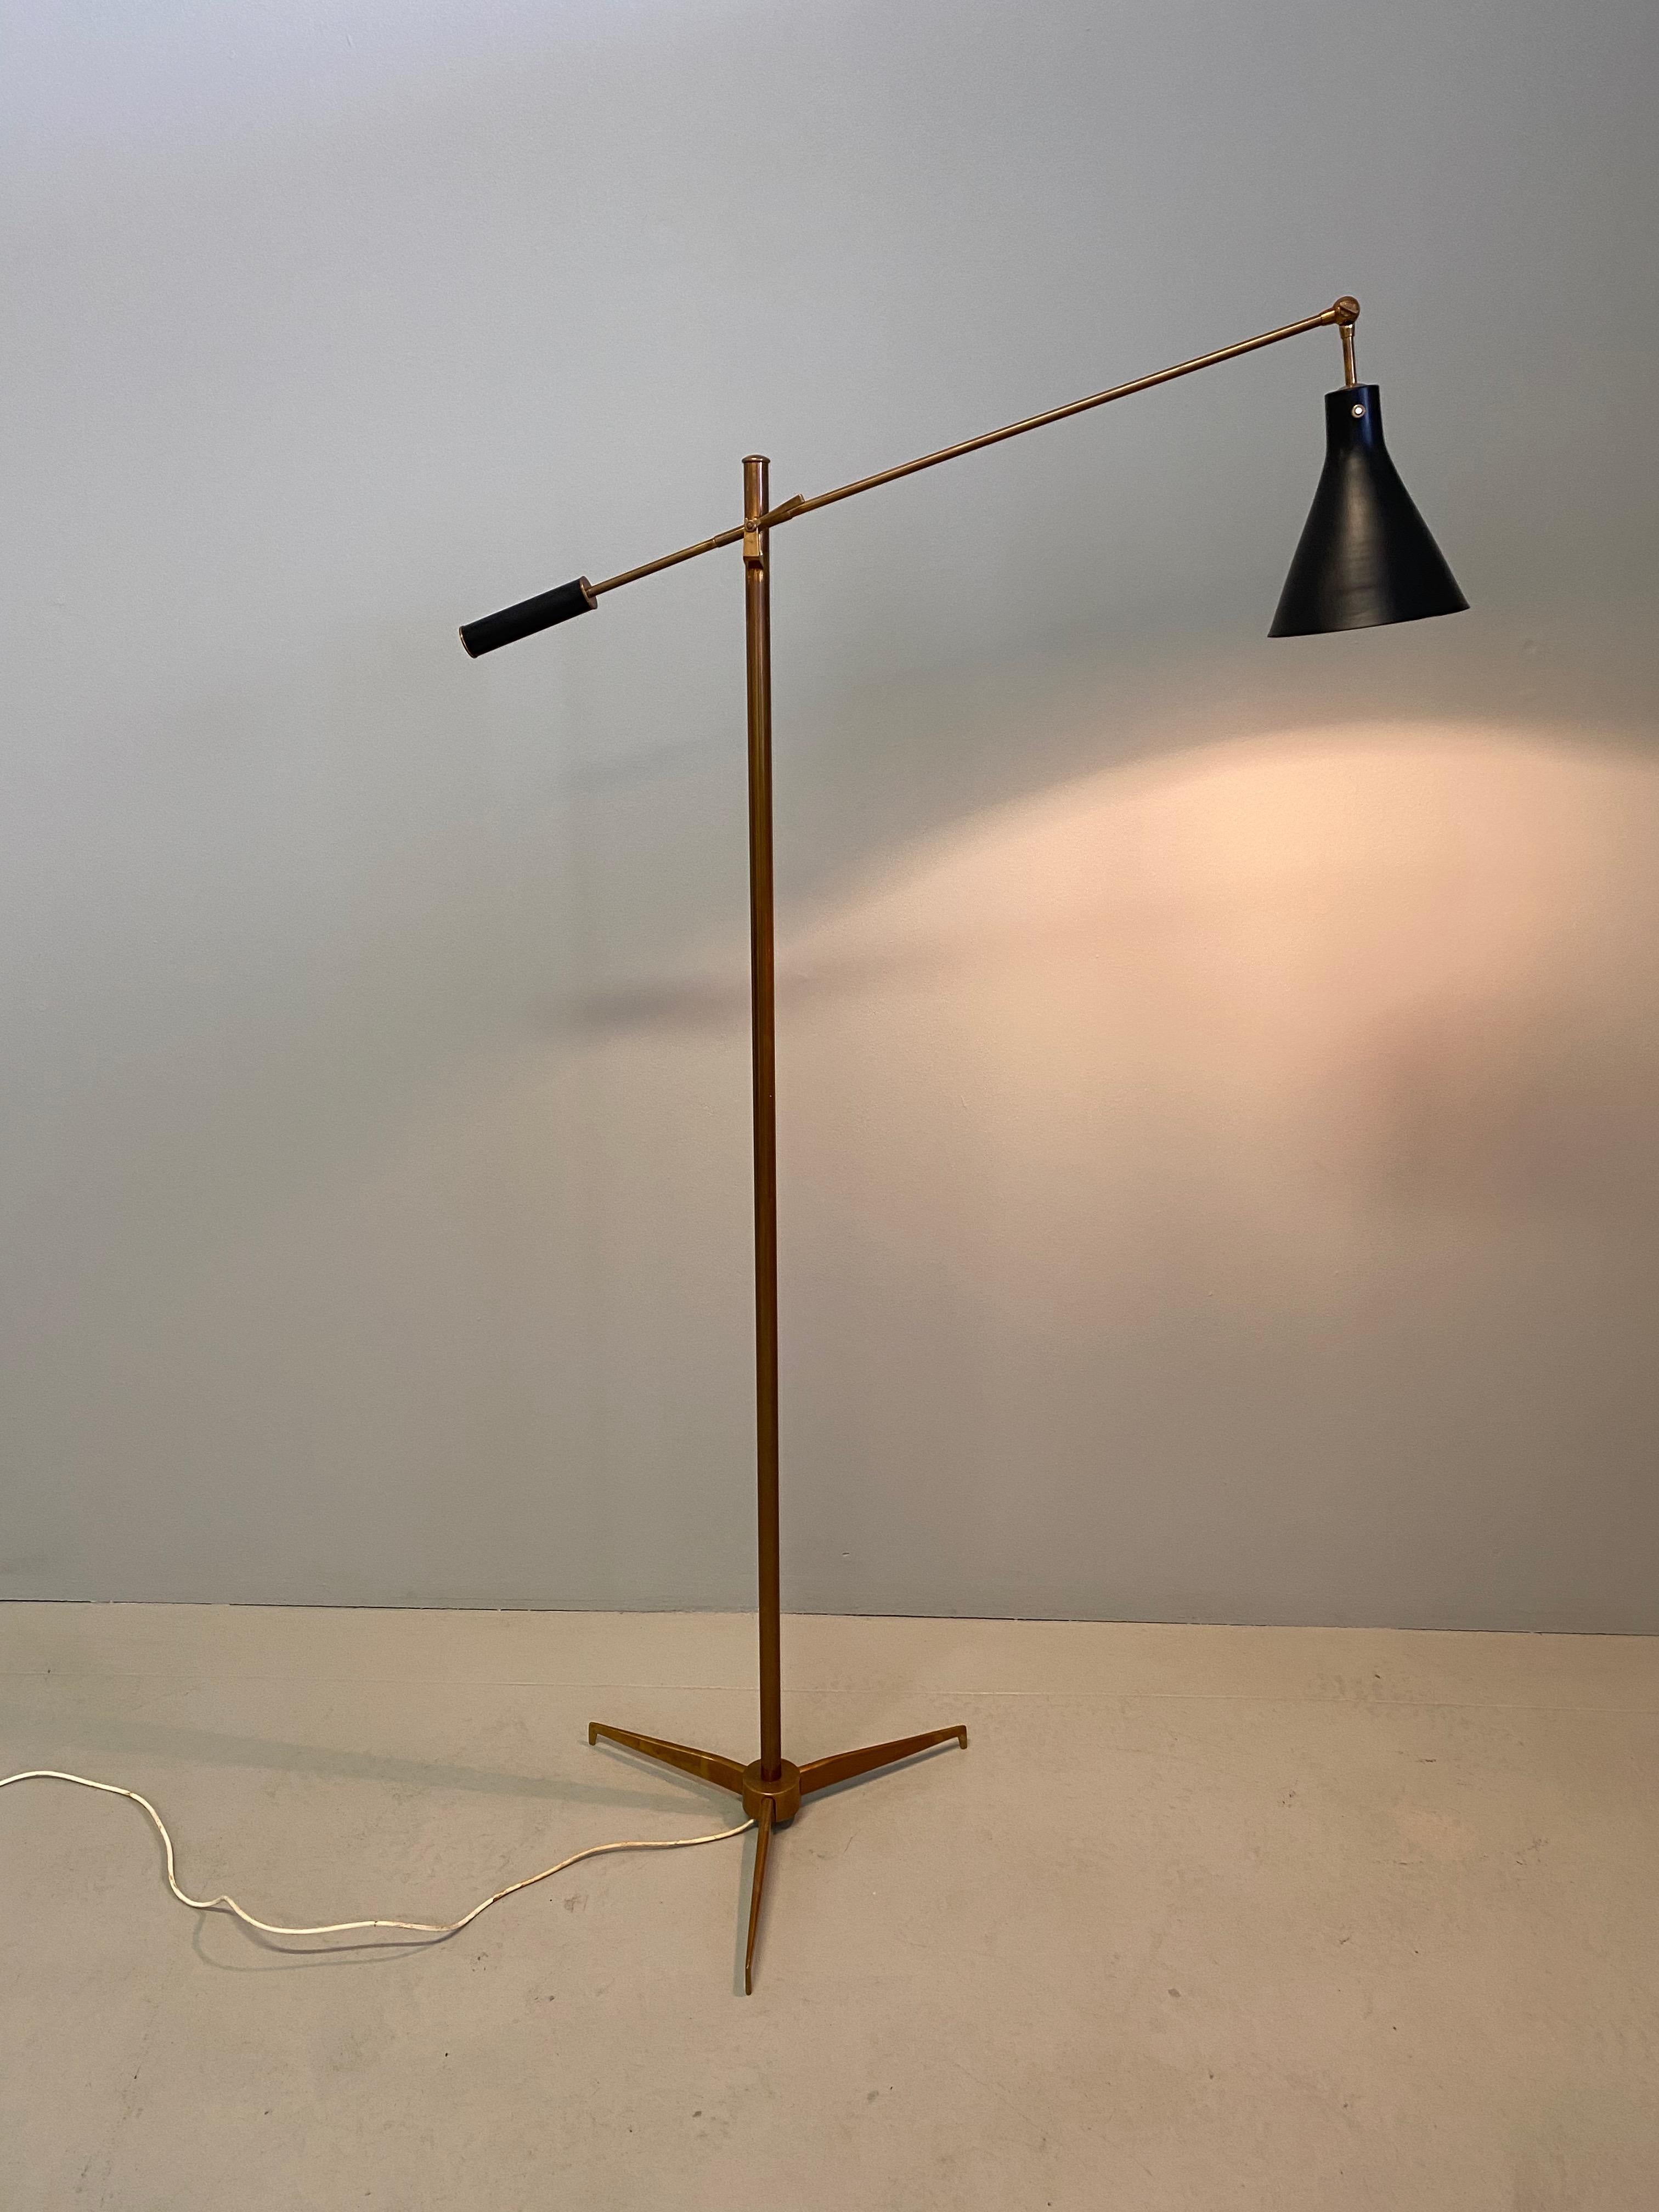 Brass floor lamp with painted aluminum shade by Angelo Lelli for Arredoluce. Designed in Italy, circa 1950s. Shade and arm can be adjusted to various heights and positions with brass key. On/off switch on shade.